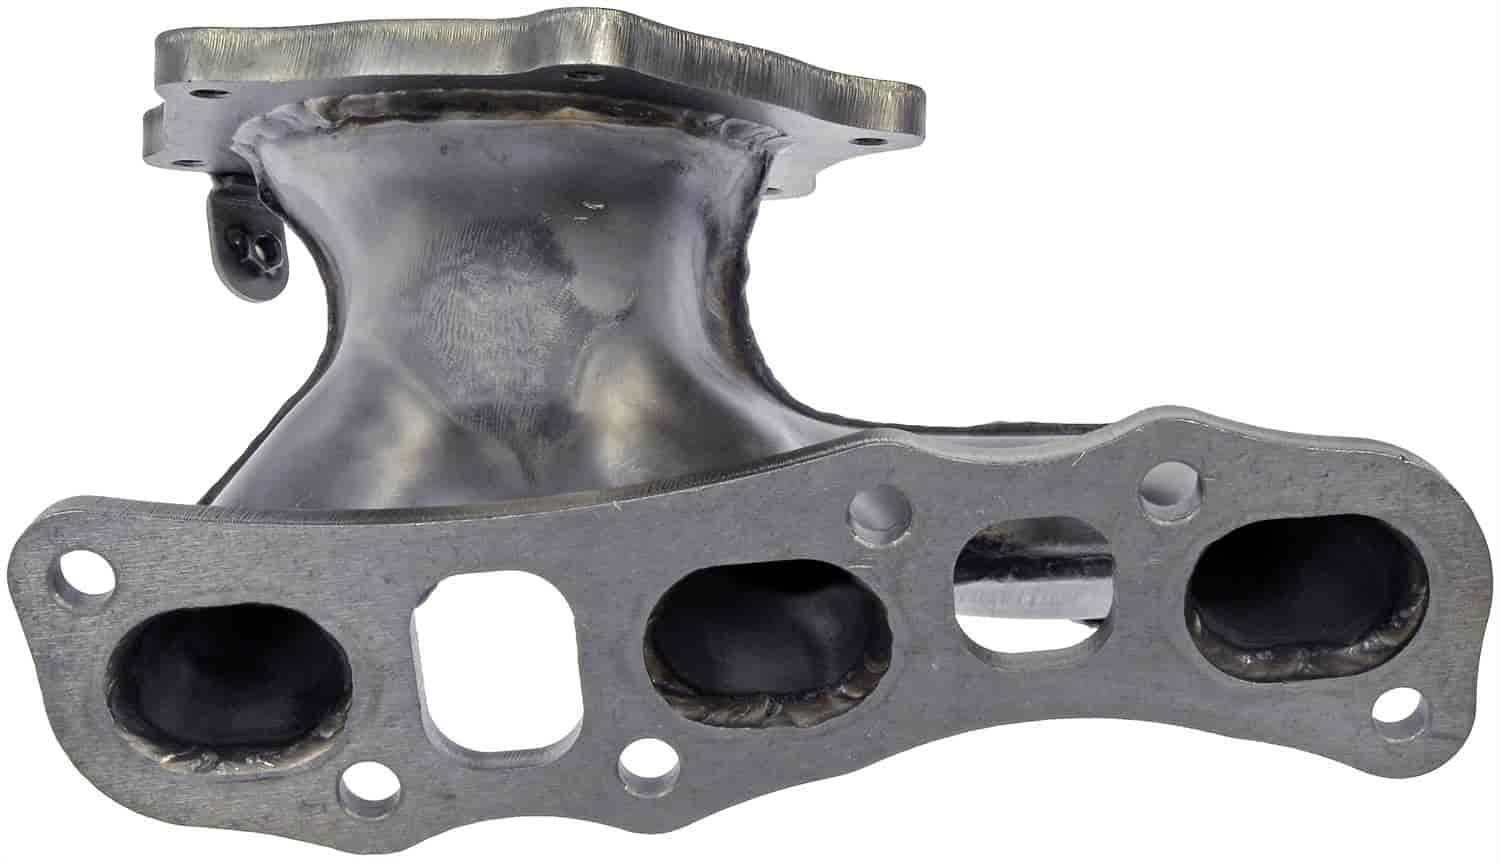 Exhaust Manifold Kit - Includes Required Gaskets and